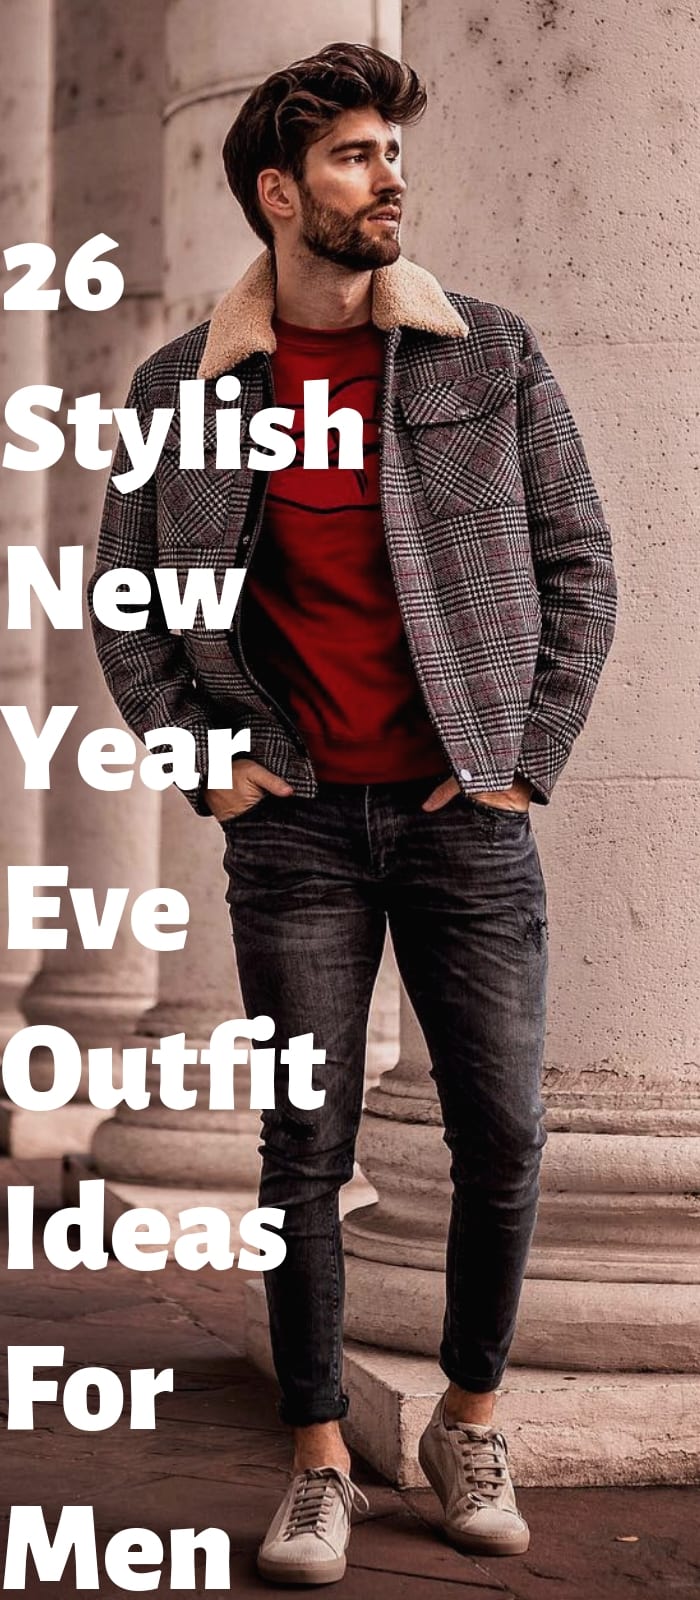 26 Stylish New Year Eve Outfit Ideas For Men!